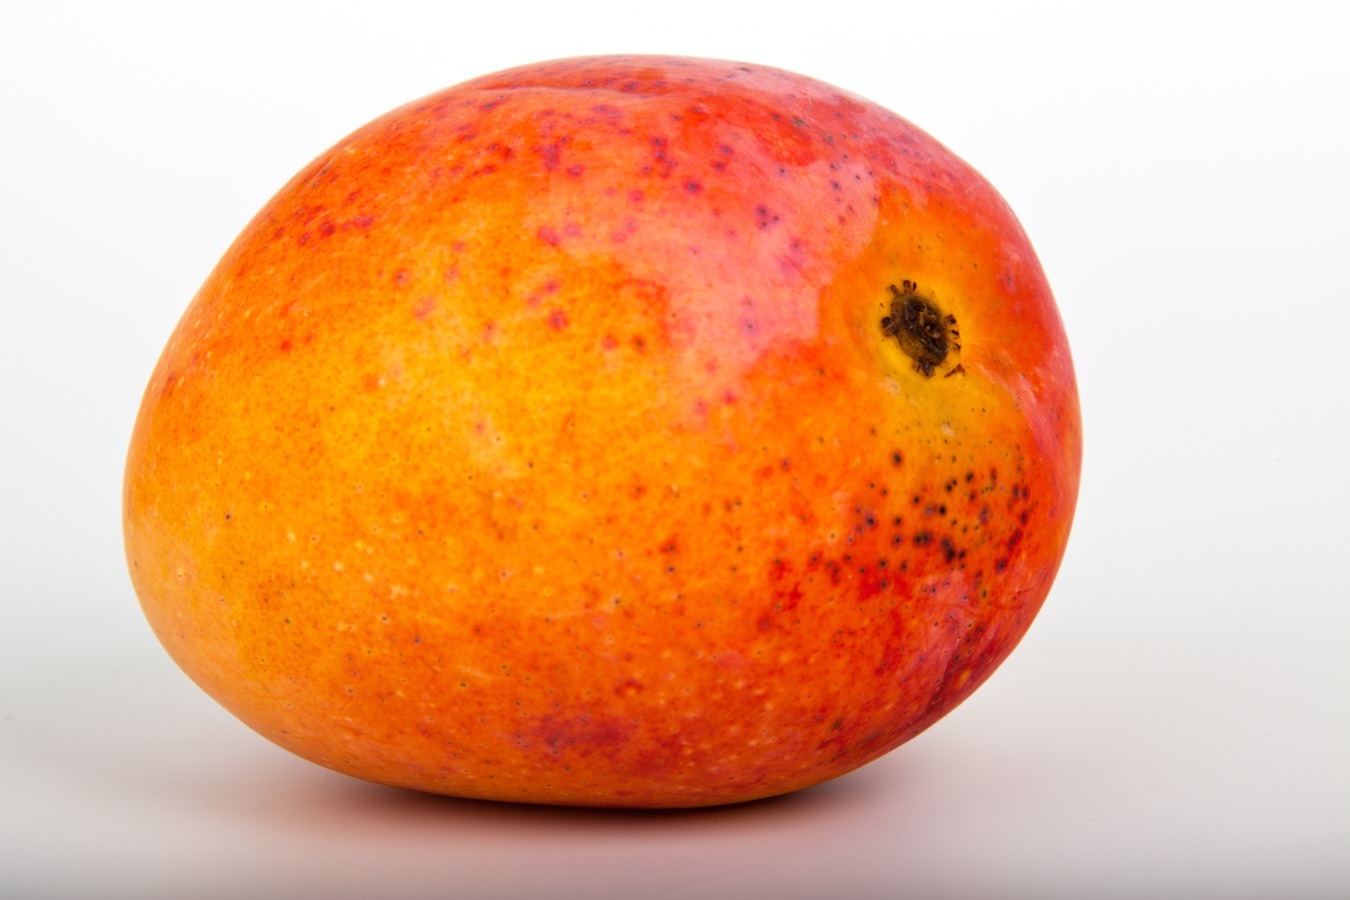 Top 10 Reasons Why Mango is Called the “King of Fruits”